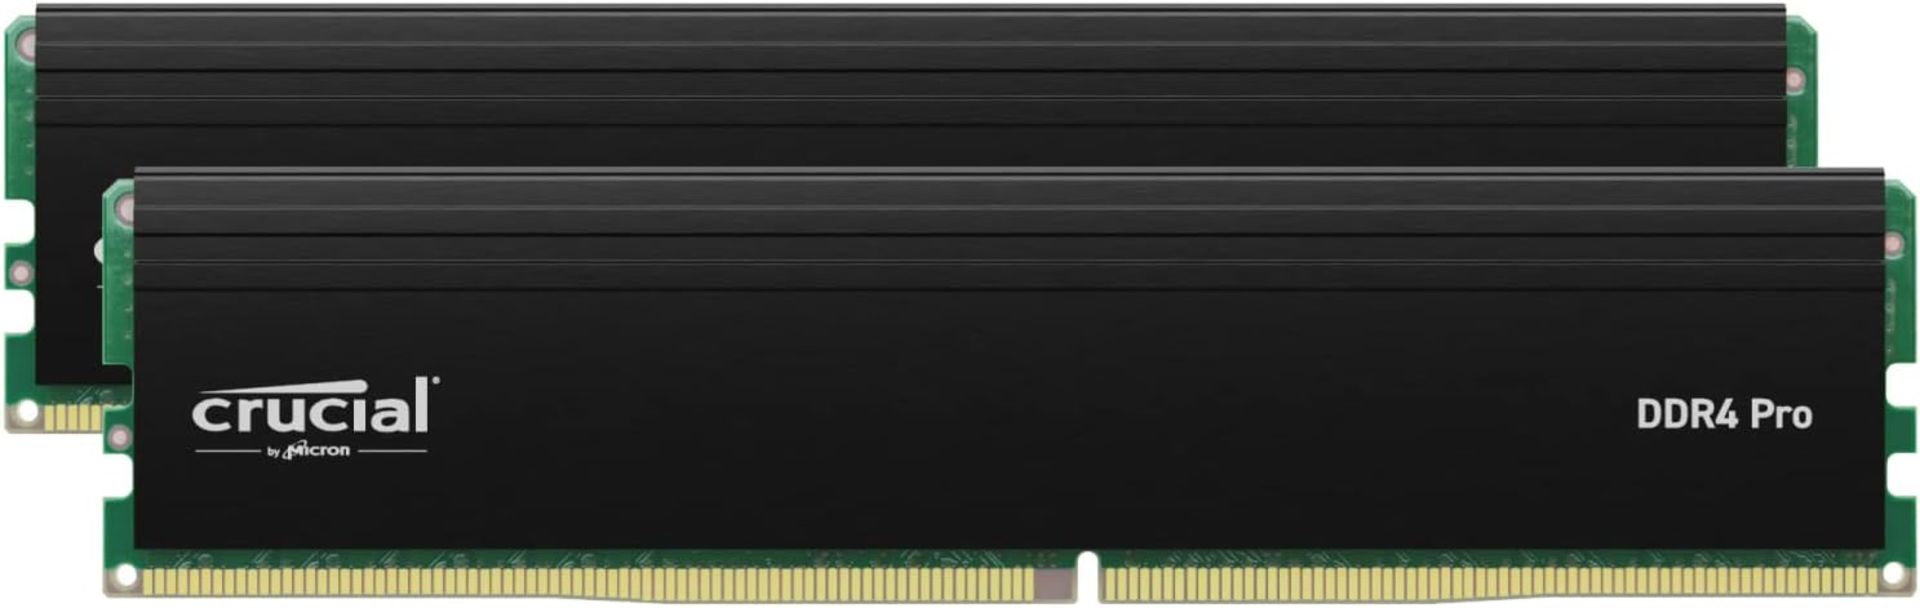 NEW & BOXED CRUCIAL Pro 32GB (2x16GB) 3200Mhz CL22 DDR4 Memory Kit. RRP £96.99. Load programs faster